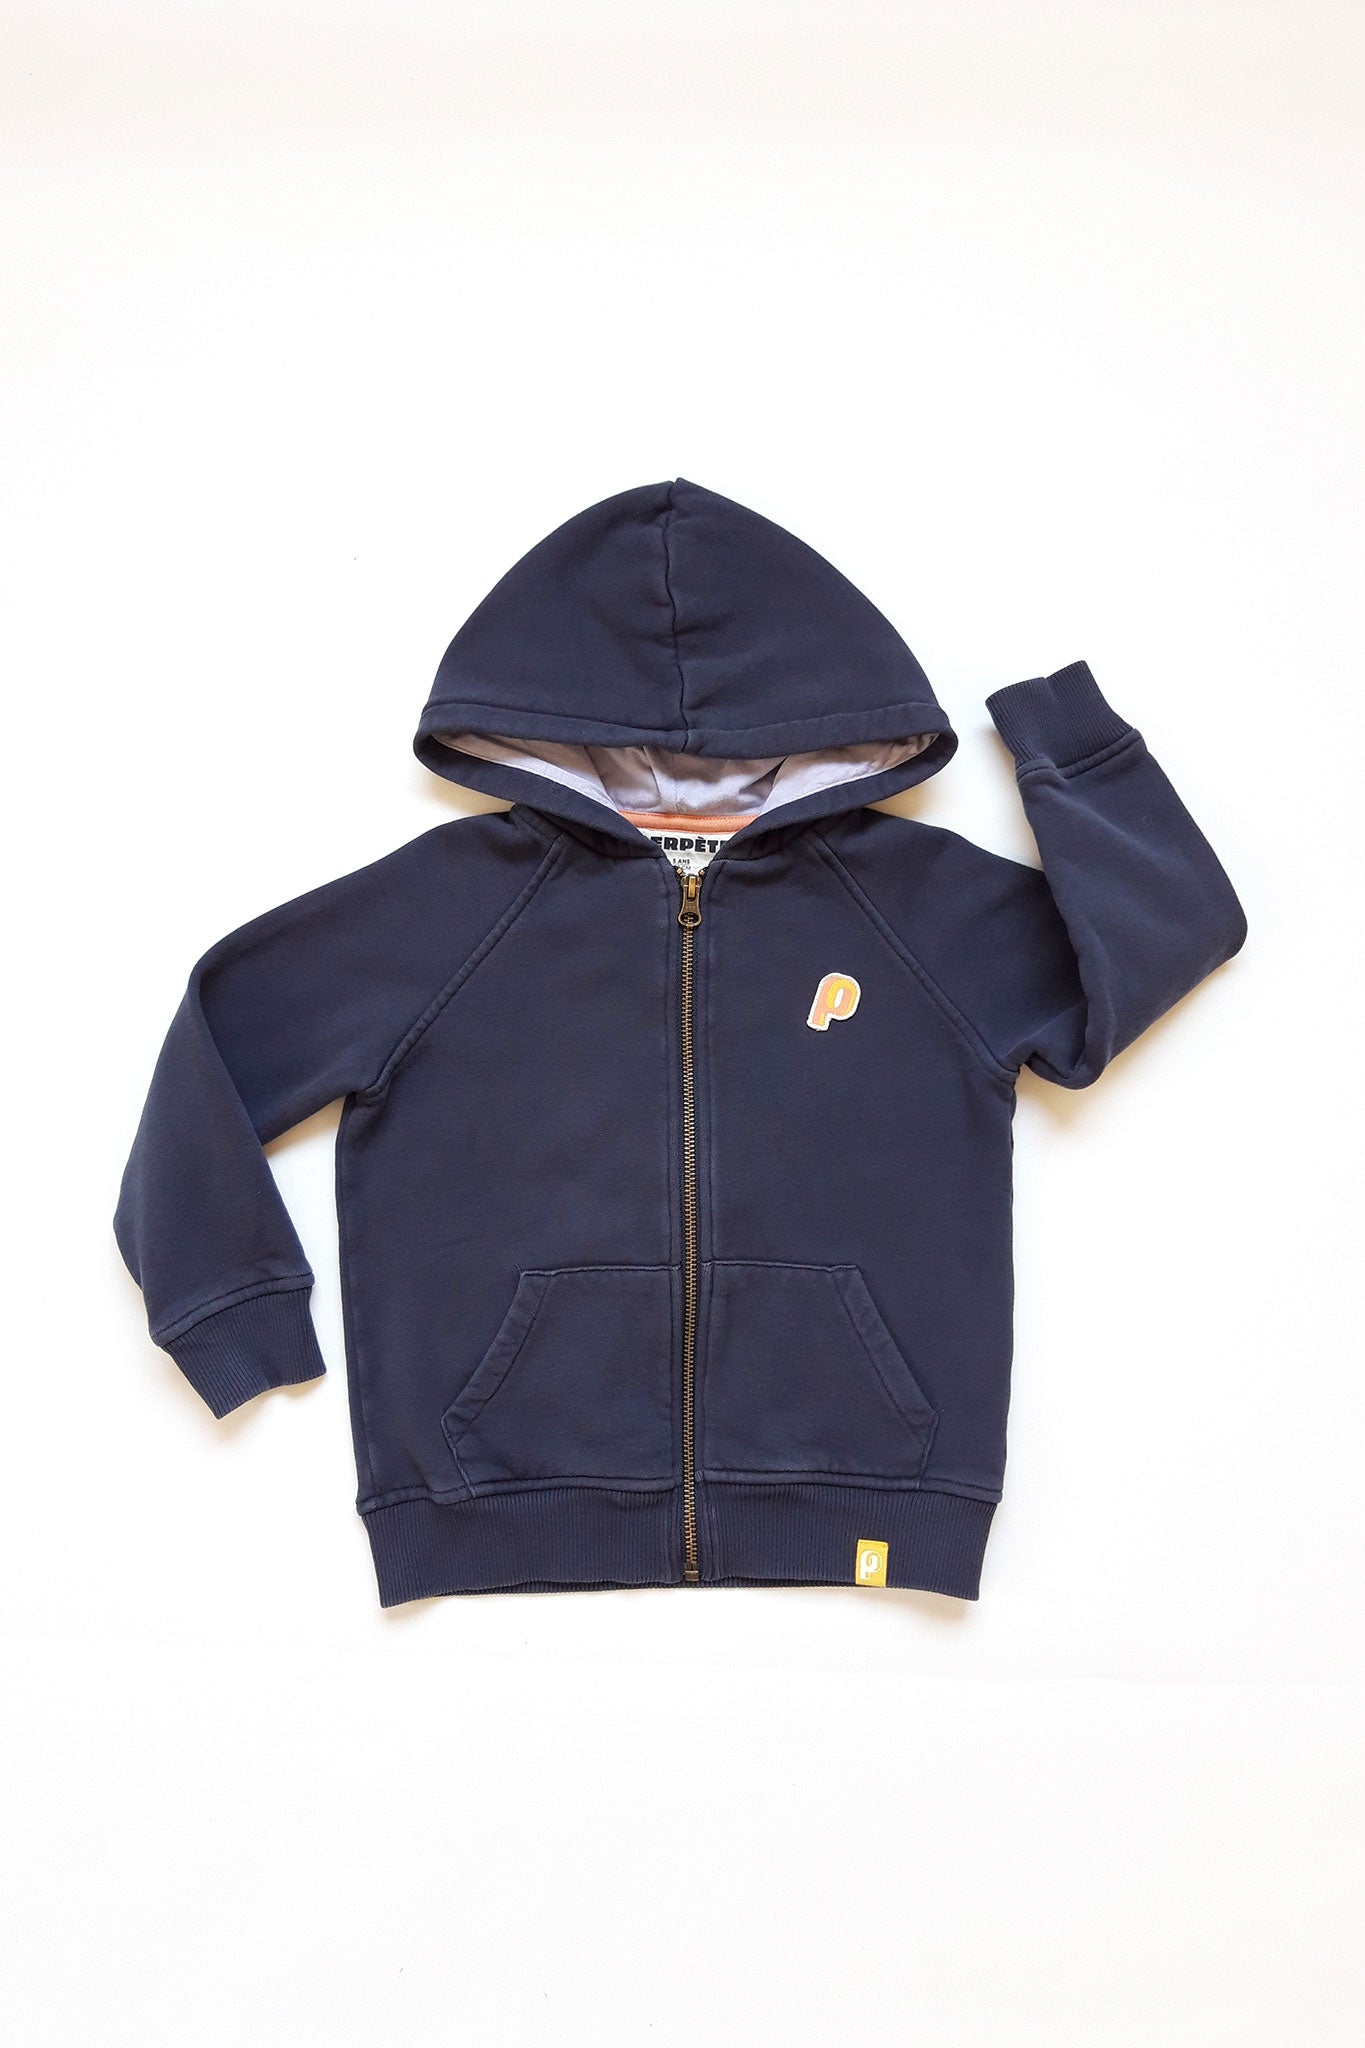 Comfy Hoodie marine - Comme neuf - 3 ans